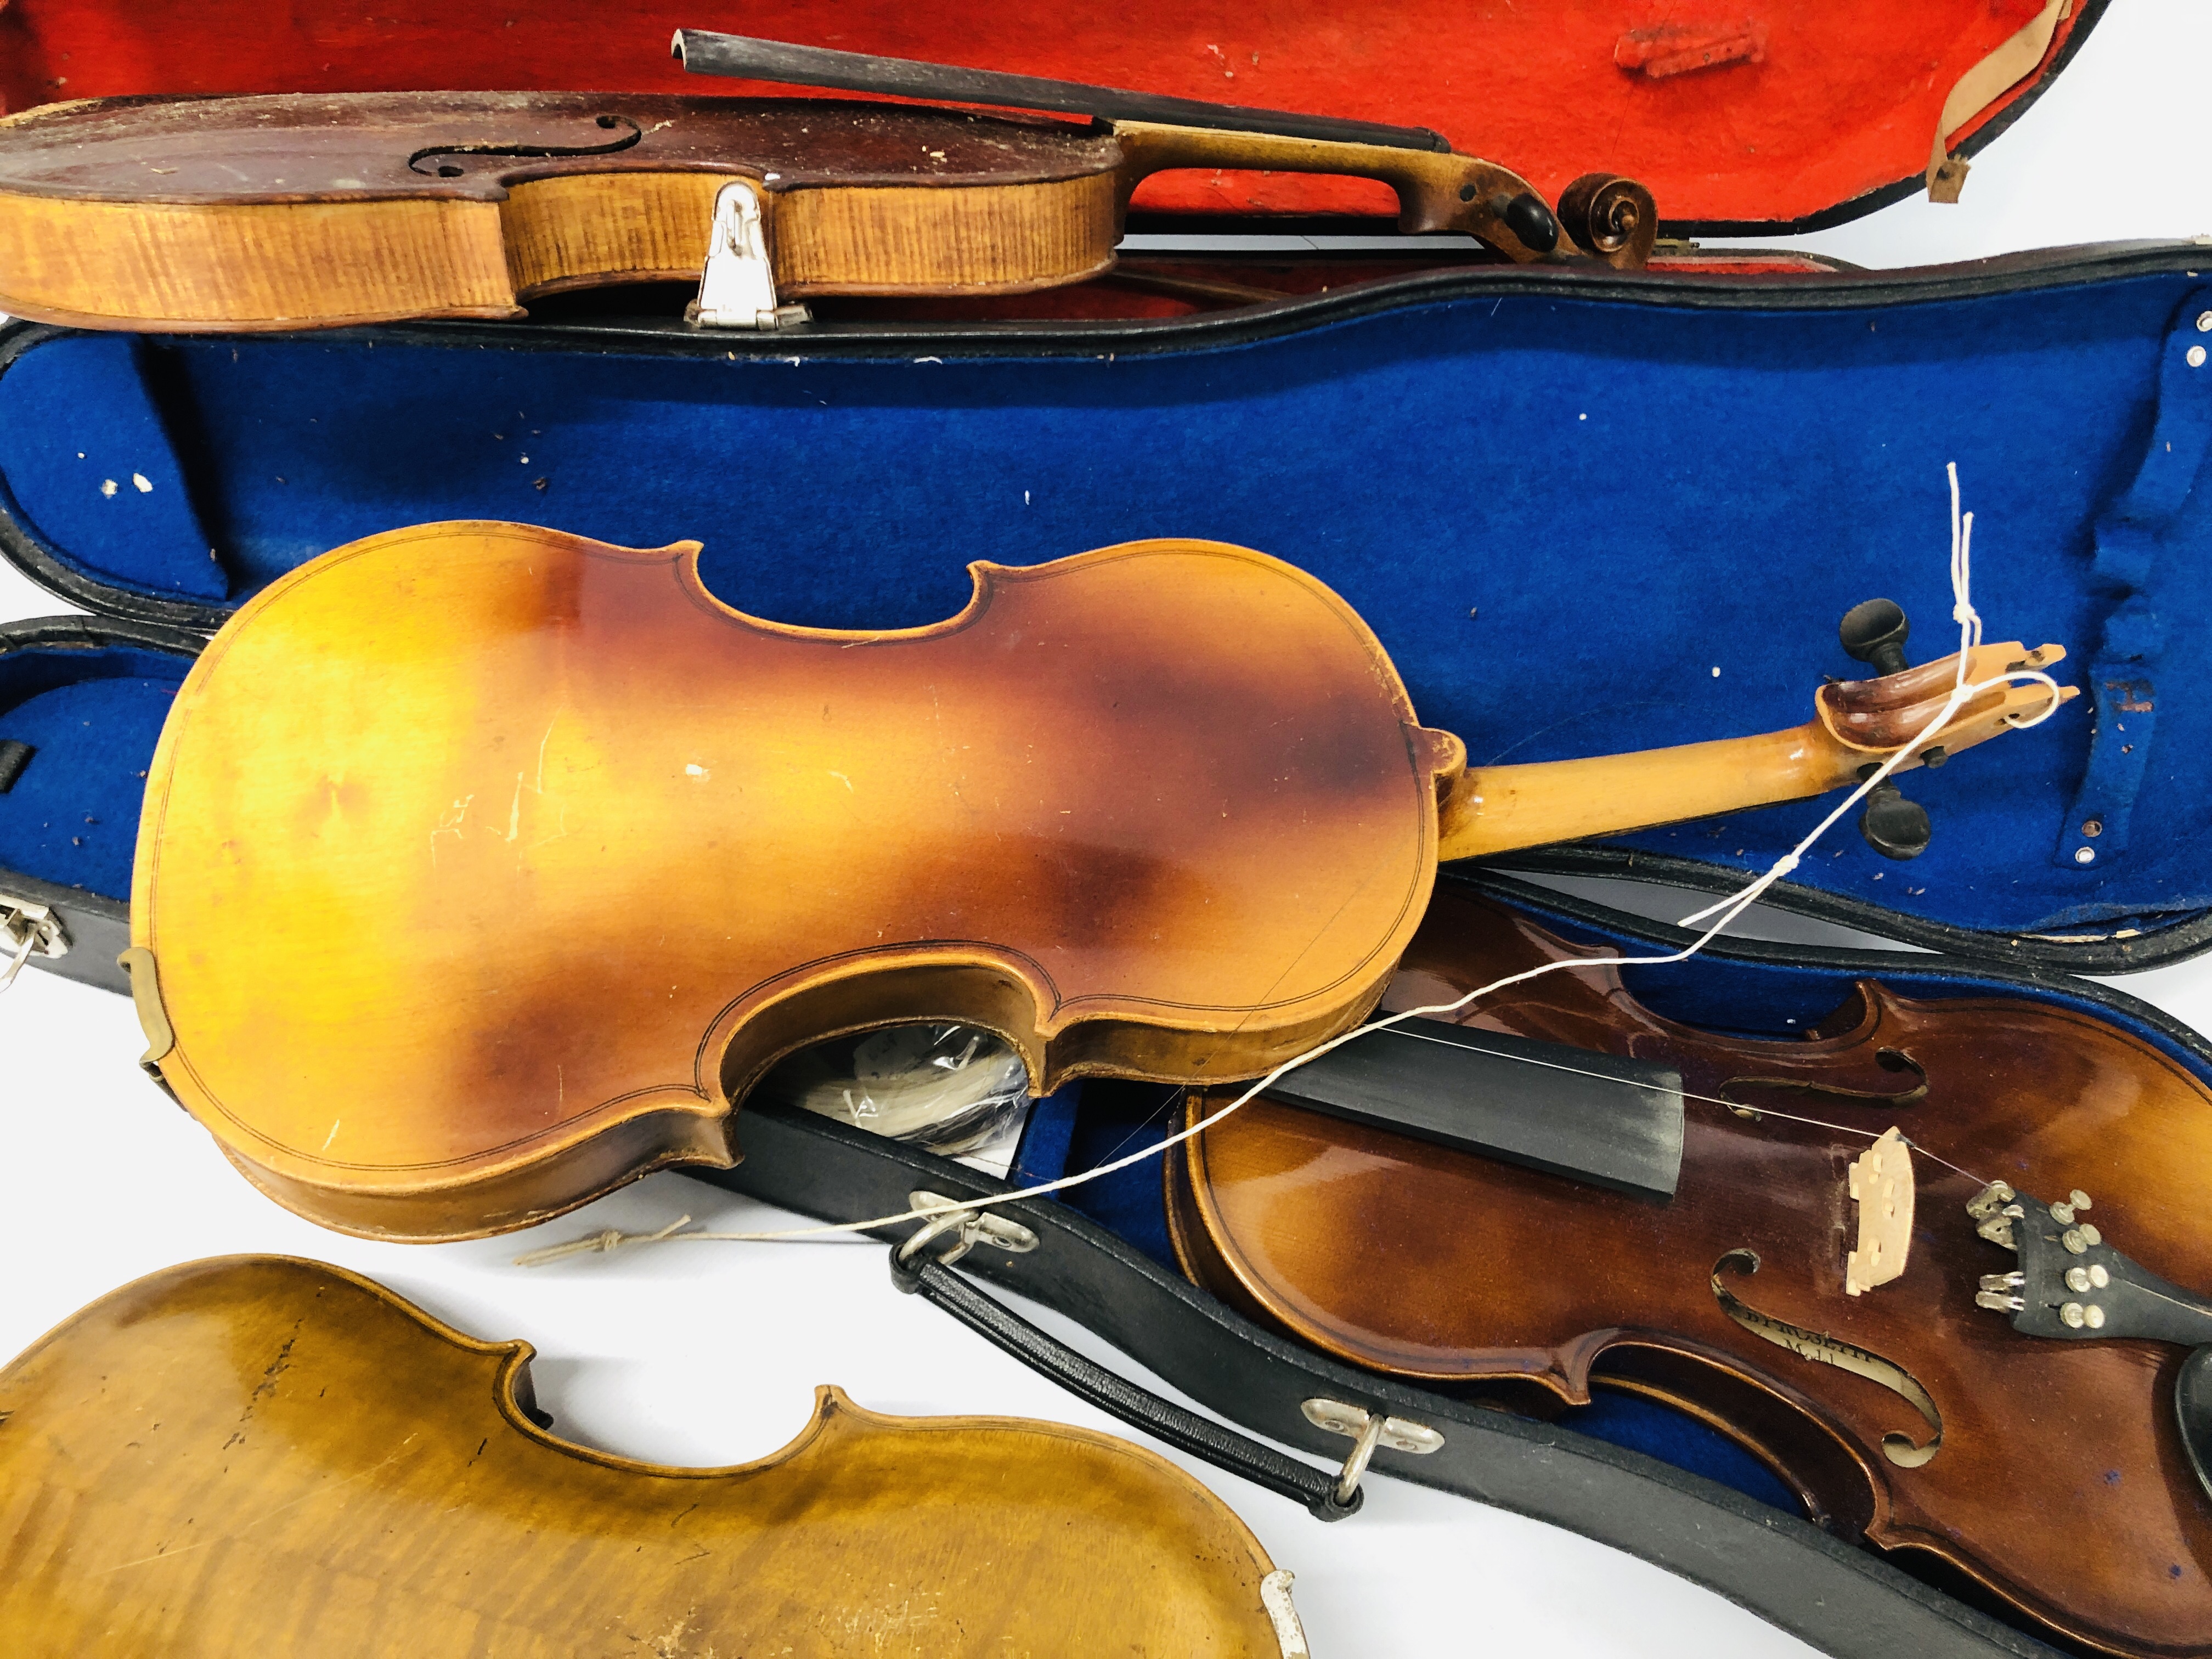 4 X VINTAGE VIOLINS AND 2 WOODEN CASES, VARIOUS BOWS (NO STRINGS) FOR RESTORATION. - Image 6 of 20